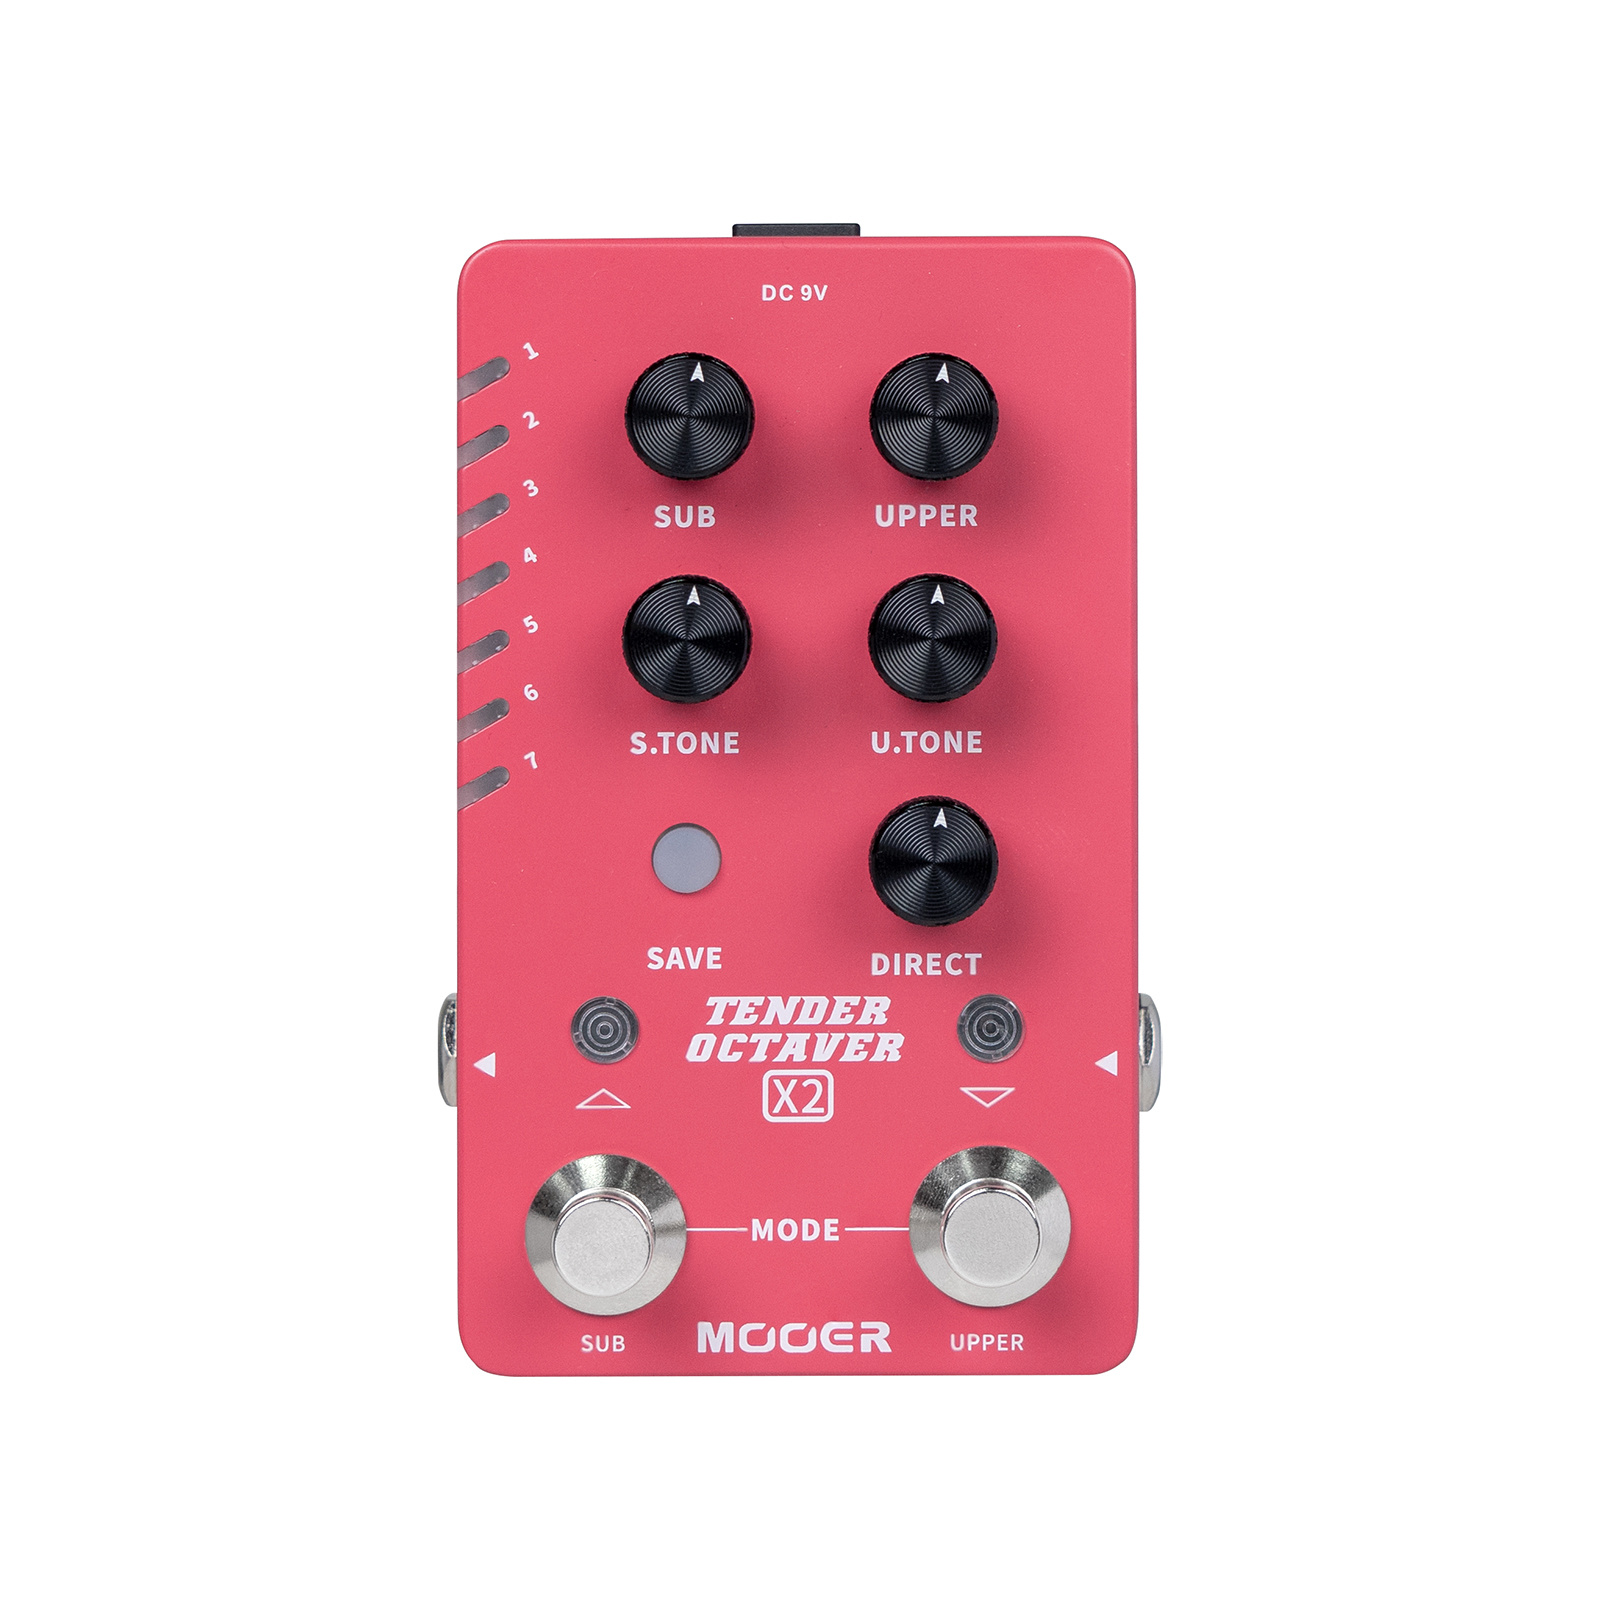 NEW ->X2 Series->PRODUCTS->PEDAL